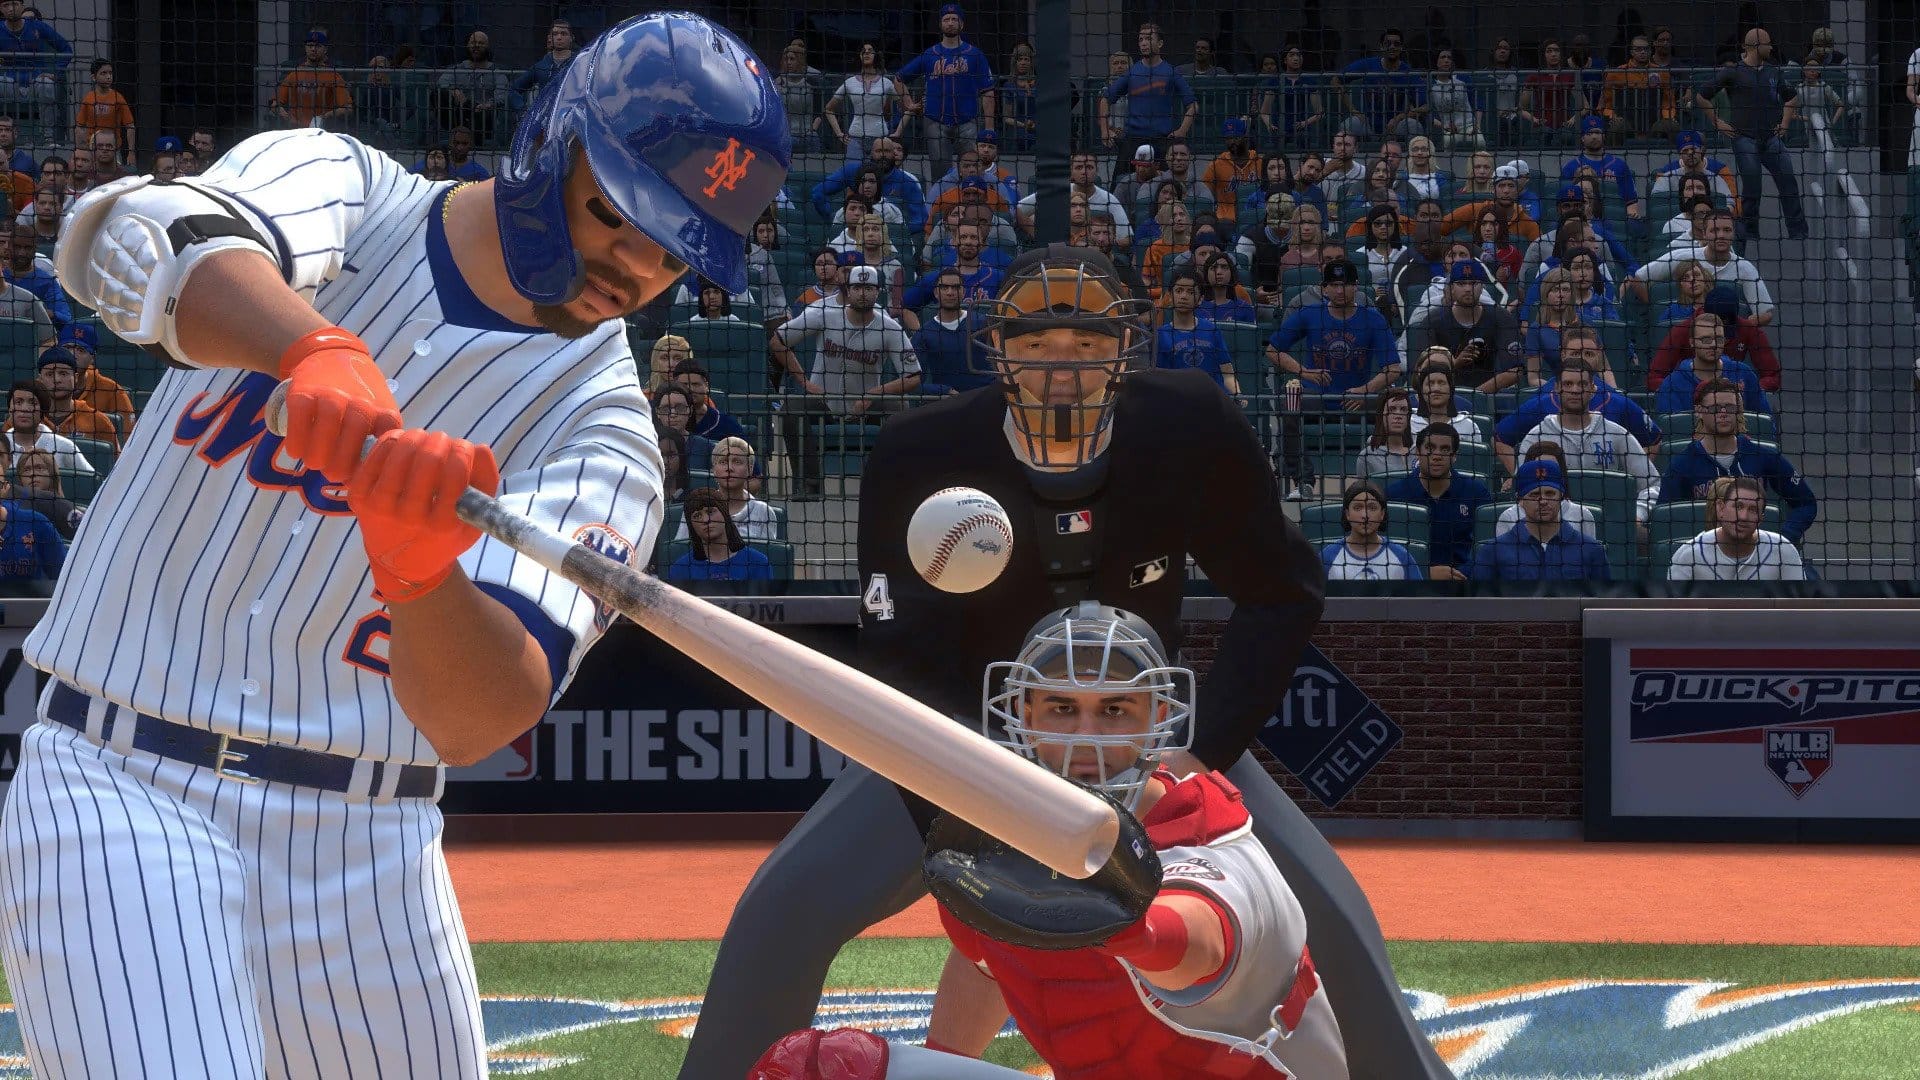 MLB The Show 22 update 1.04